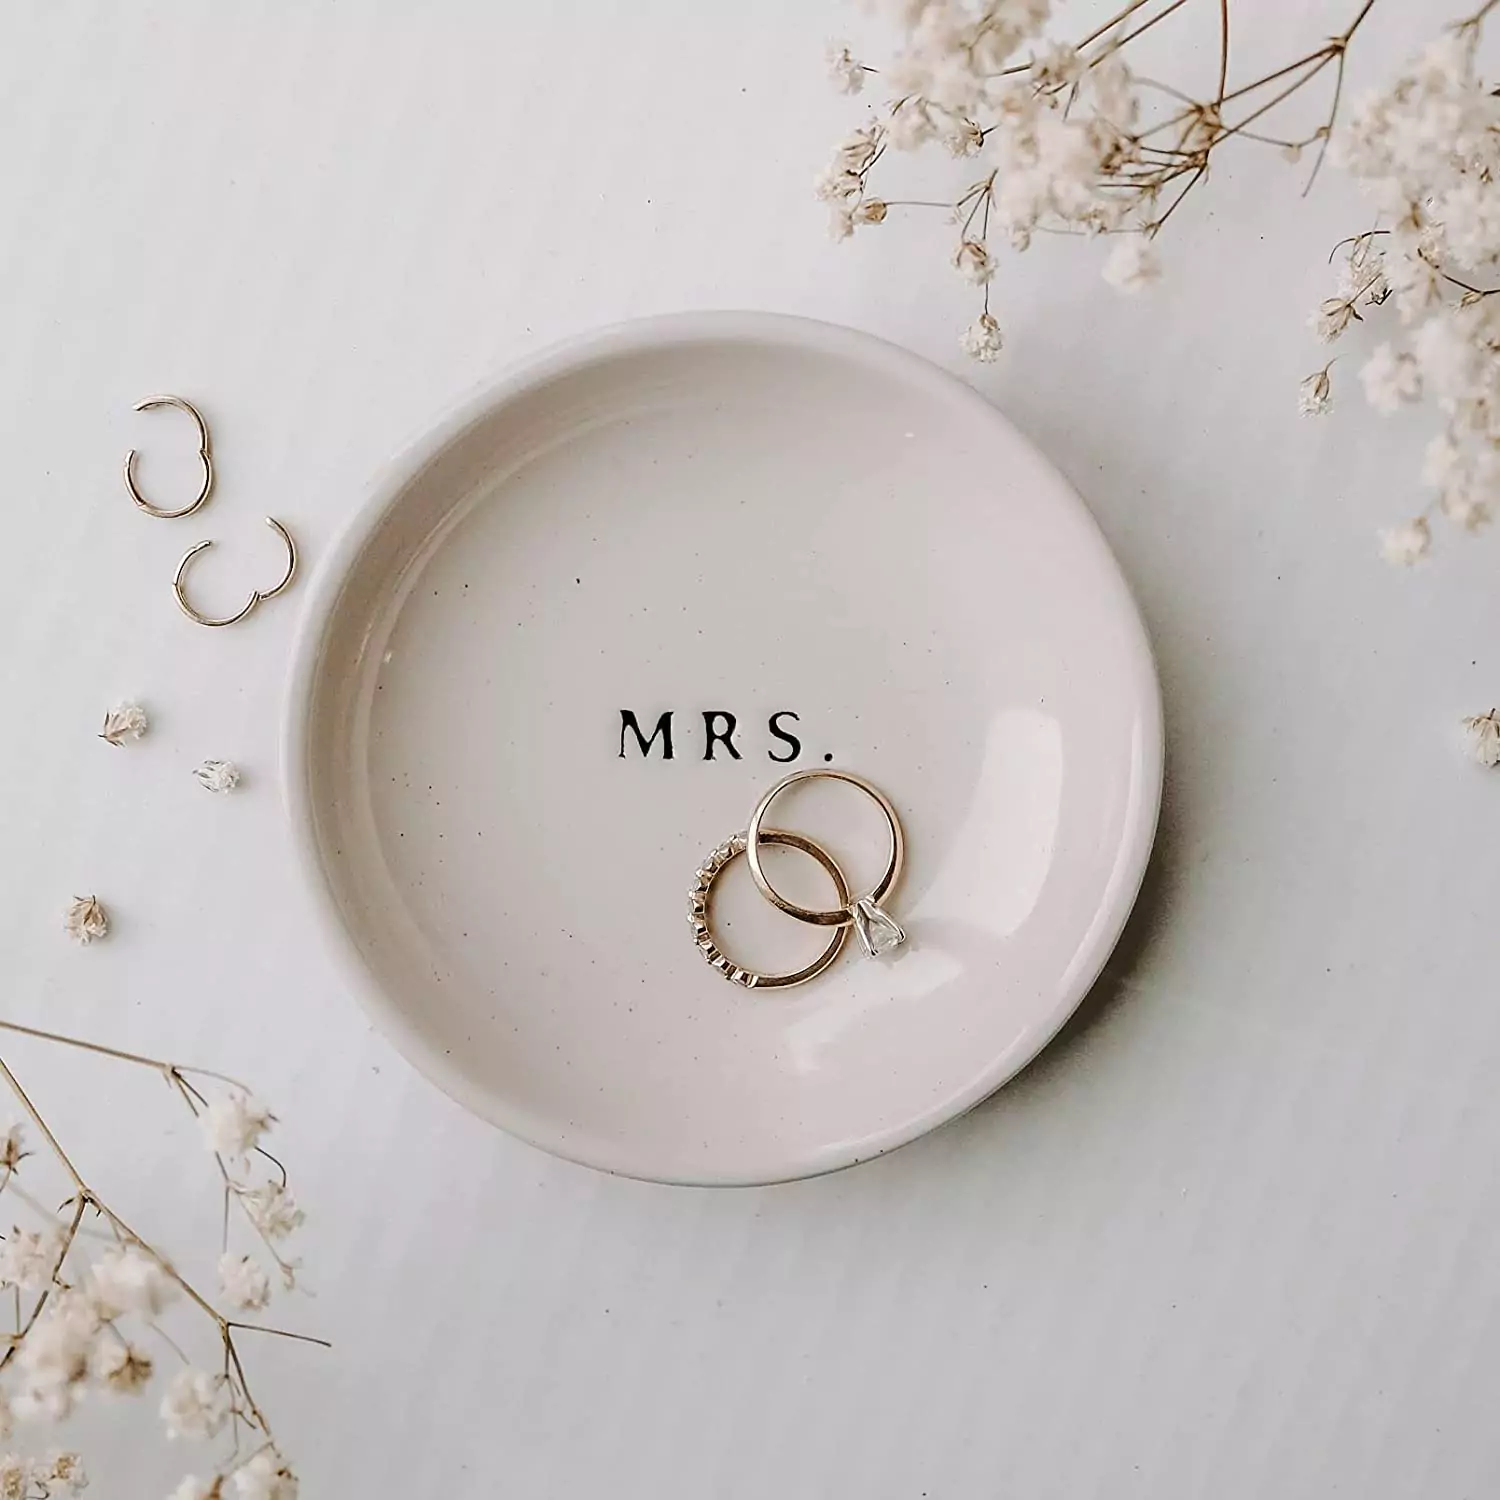 Buy Personalized Decoration engagement ring platter,Ring Plate,Ring Holder, Ring Tray with wooden name Of groom and bride|wedding ring platter|decorative  tray|marriage decor Online at Low Prices in India - Amazon.in